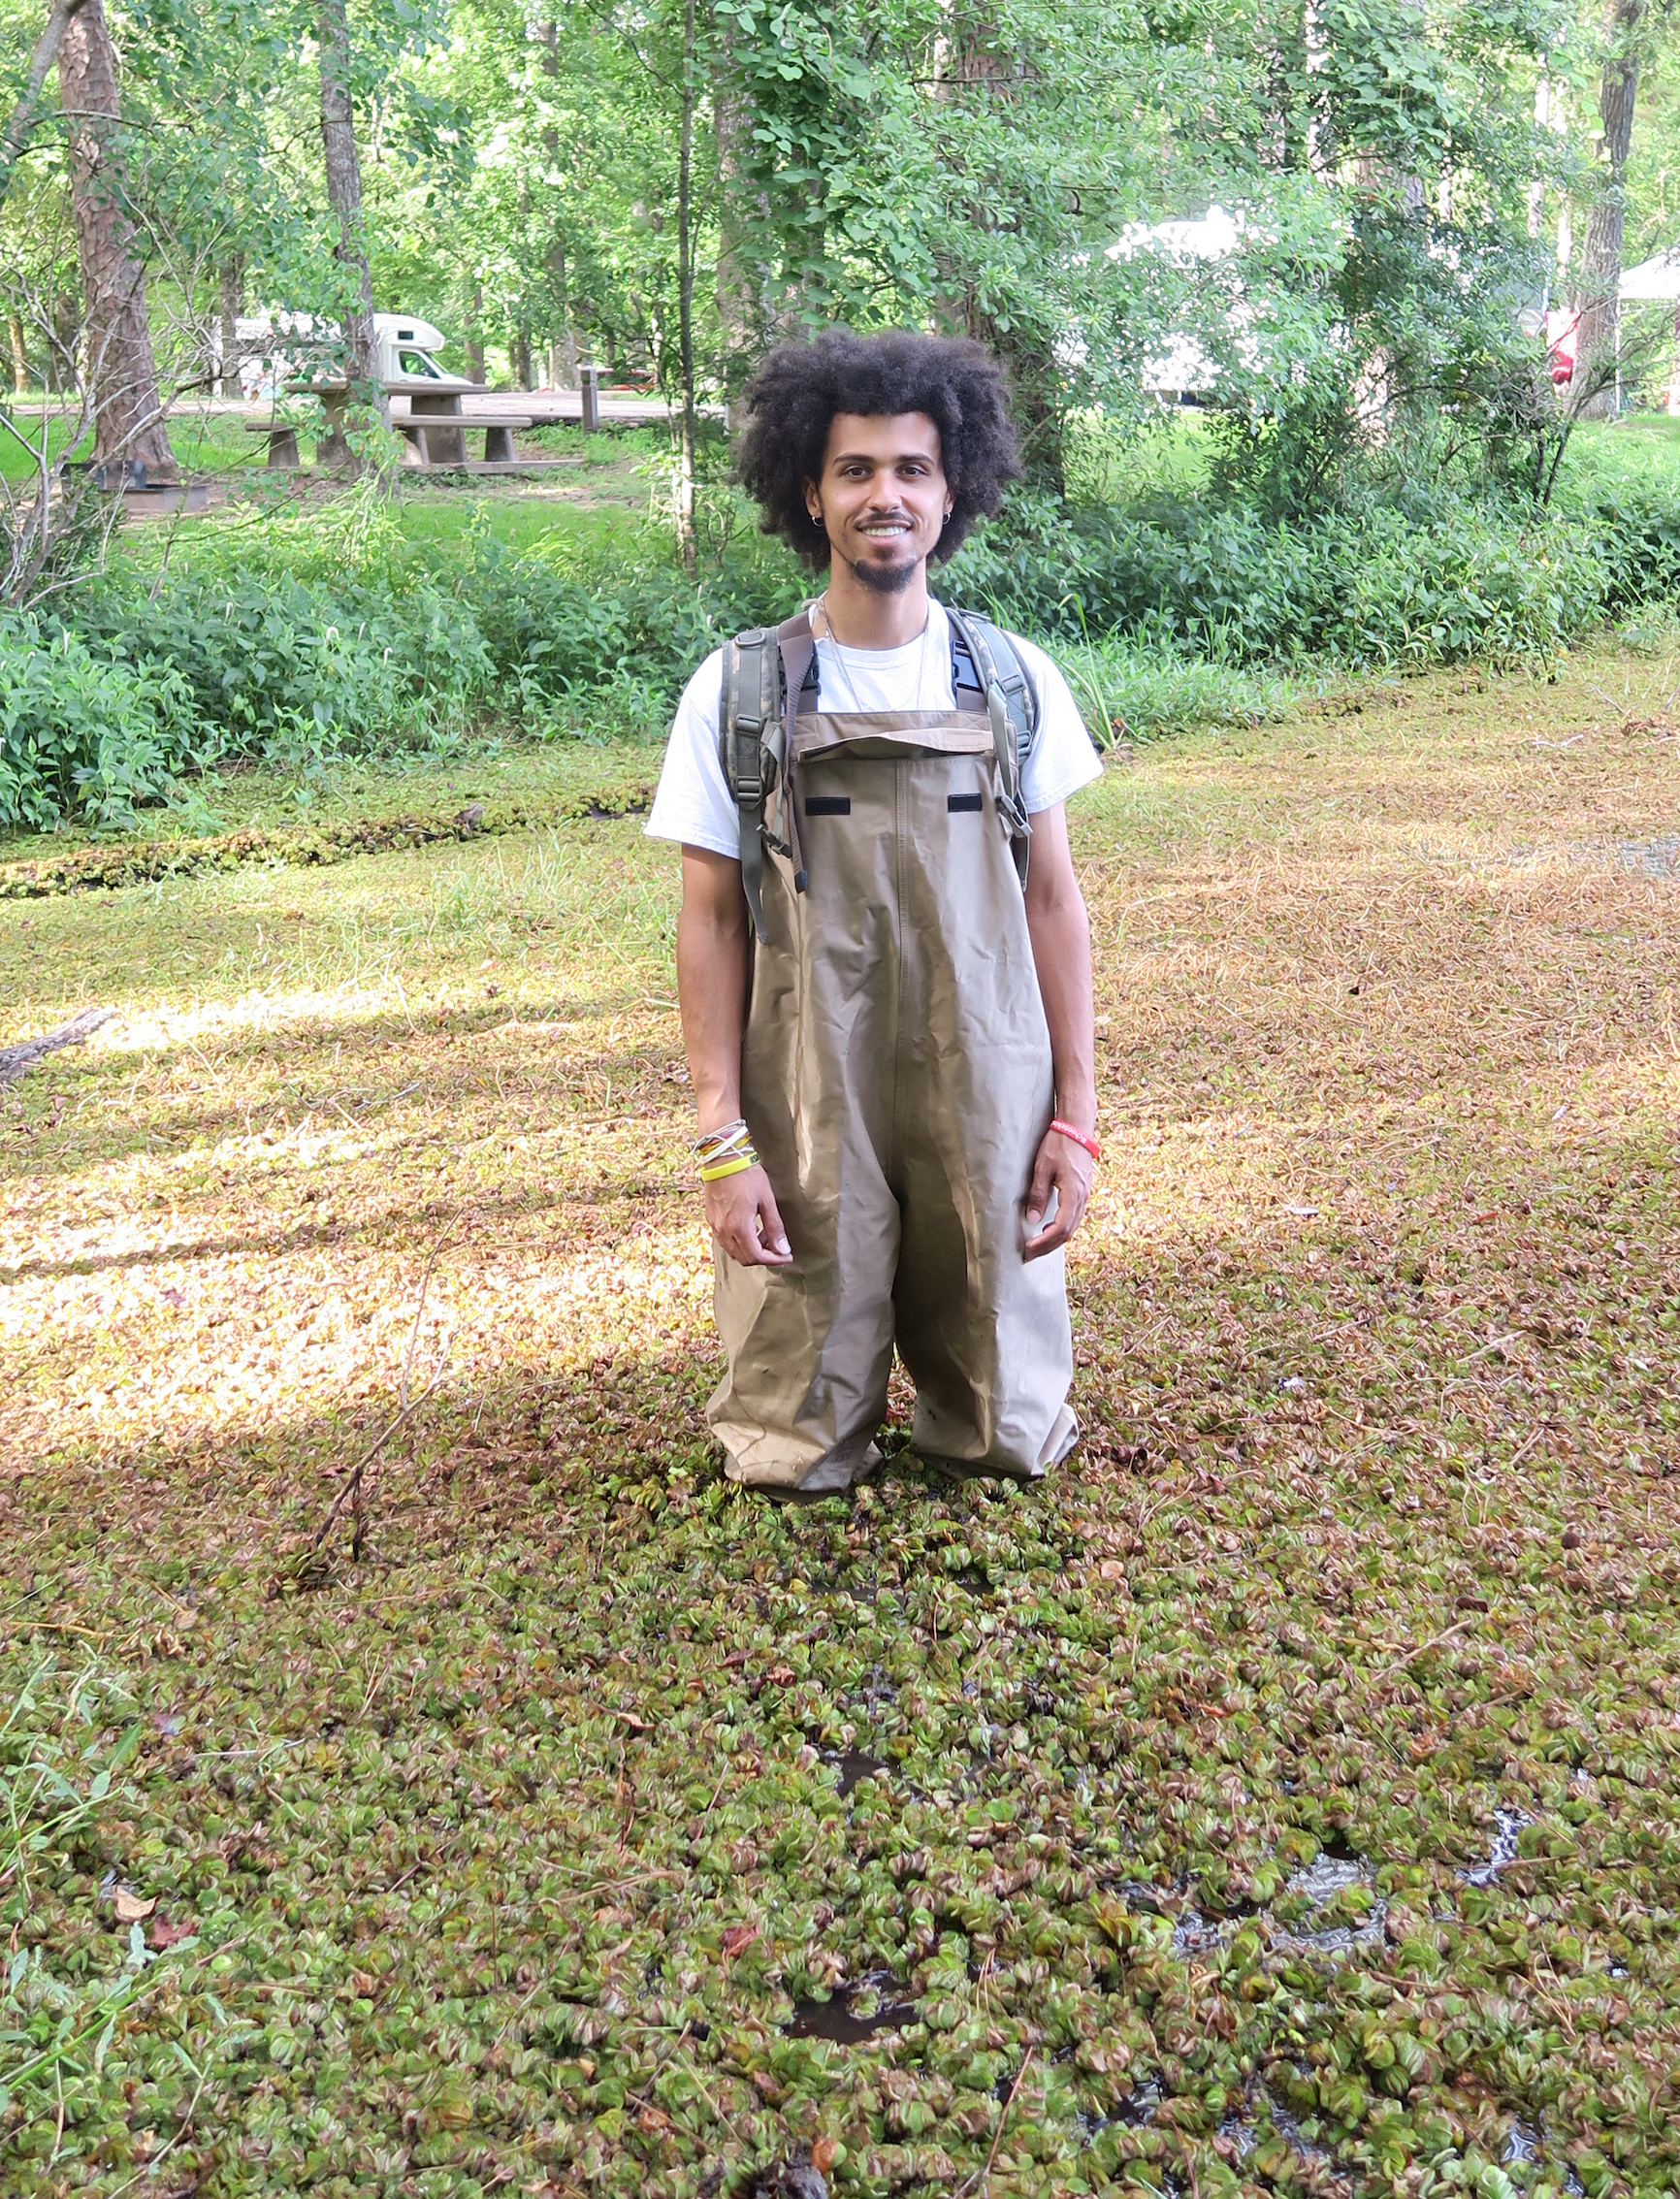 Photograph of student standing in water bog, wearing waders and surrounded by floating plant, Salvania. Student is smiling at the camera.